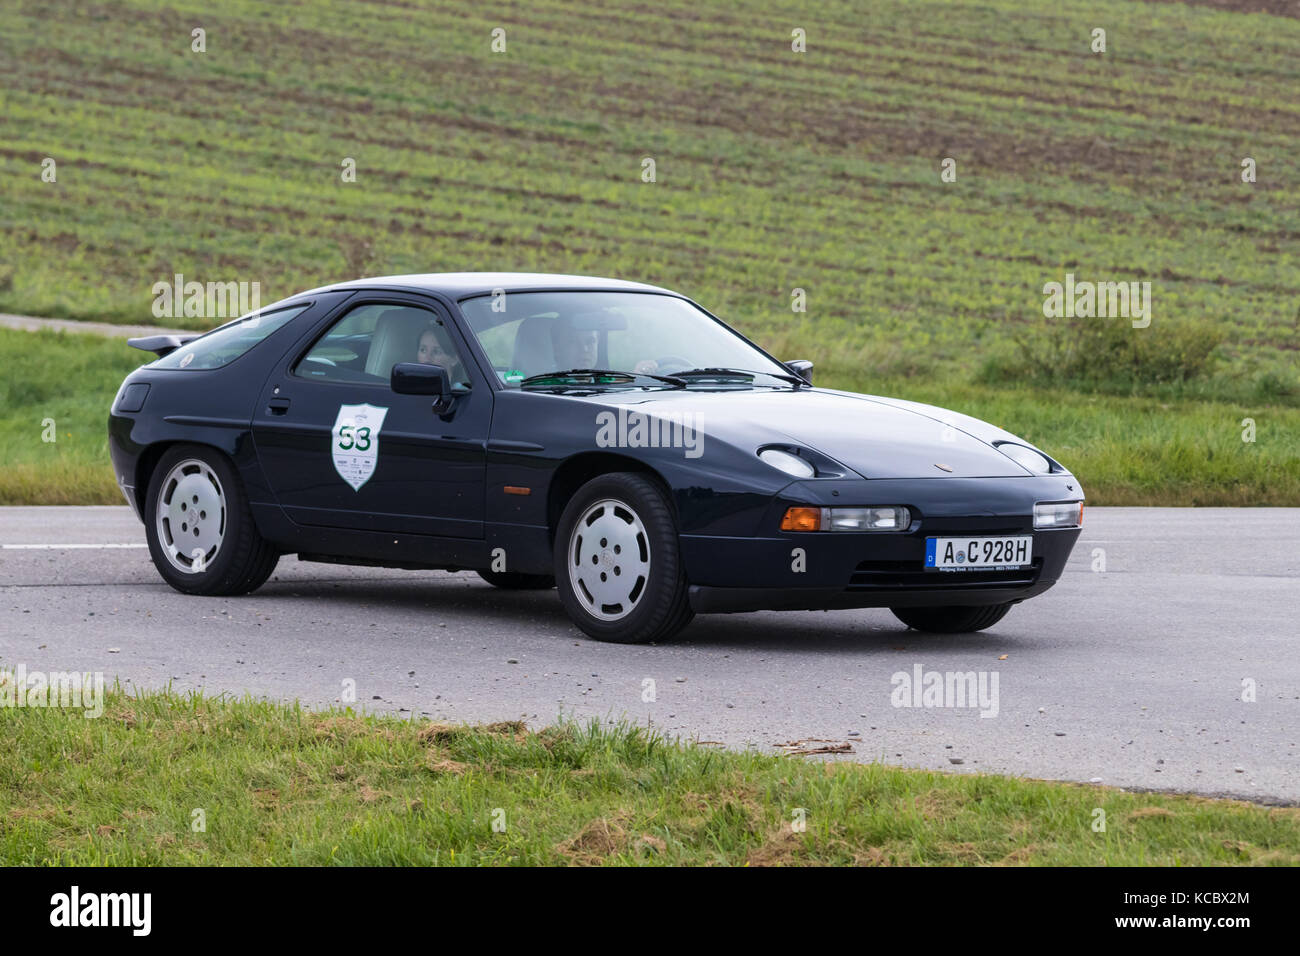 Augsburg, Germany - October 1, 2017: Porsche 928 oldtimer car at the Fuggerstadt Classic 2017 Oldtimer Rallye on October 1, 2017 in Augsburg, Germany. Stock Photo